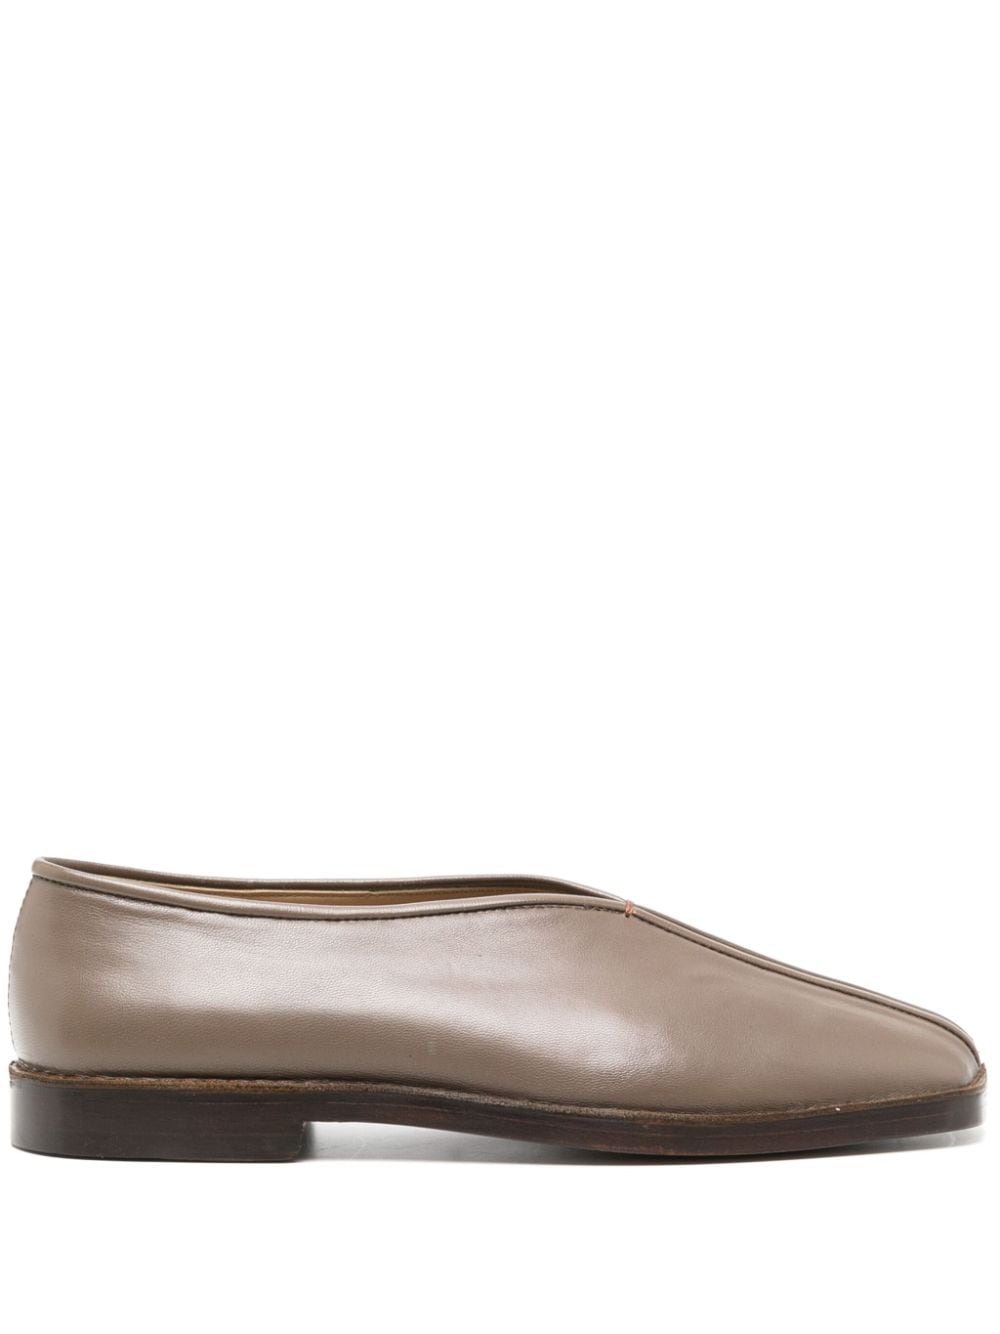 LEMAIRE piped leather slippers - Marrone